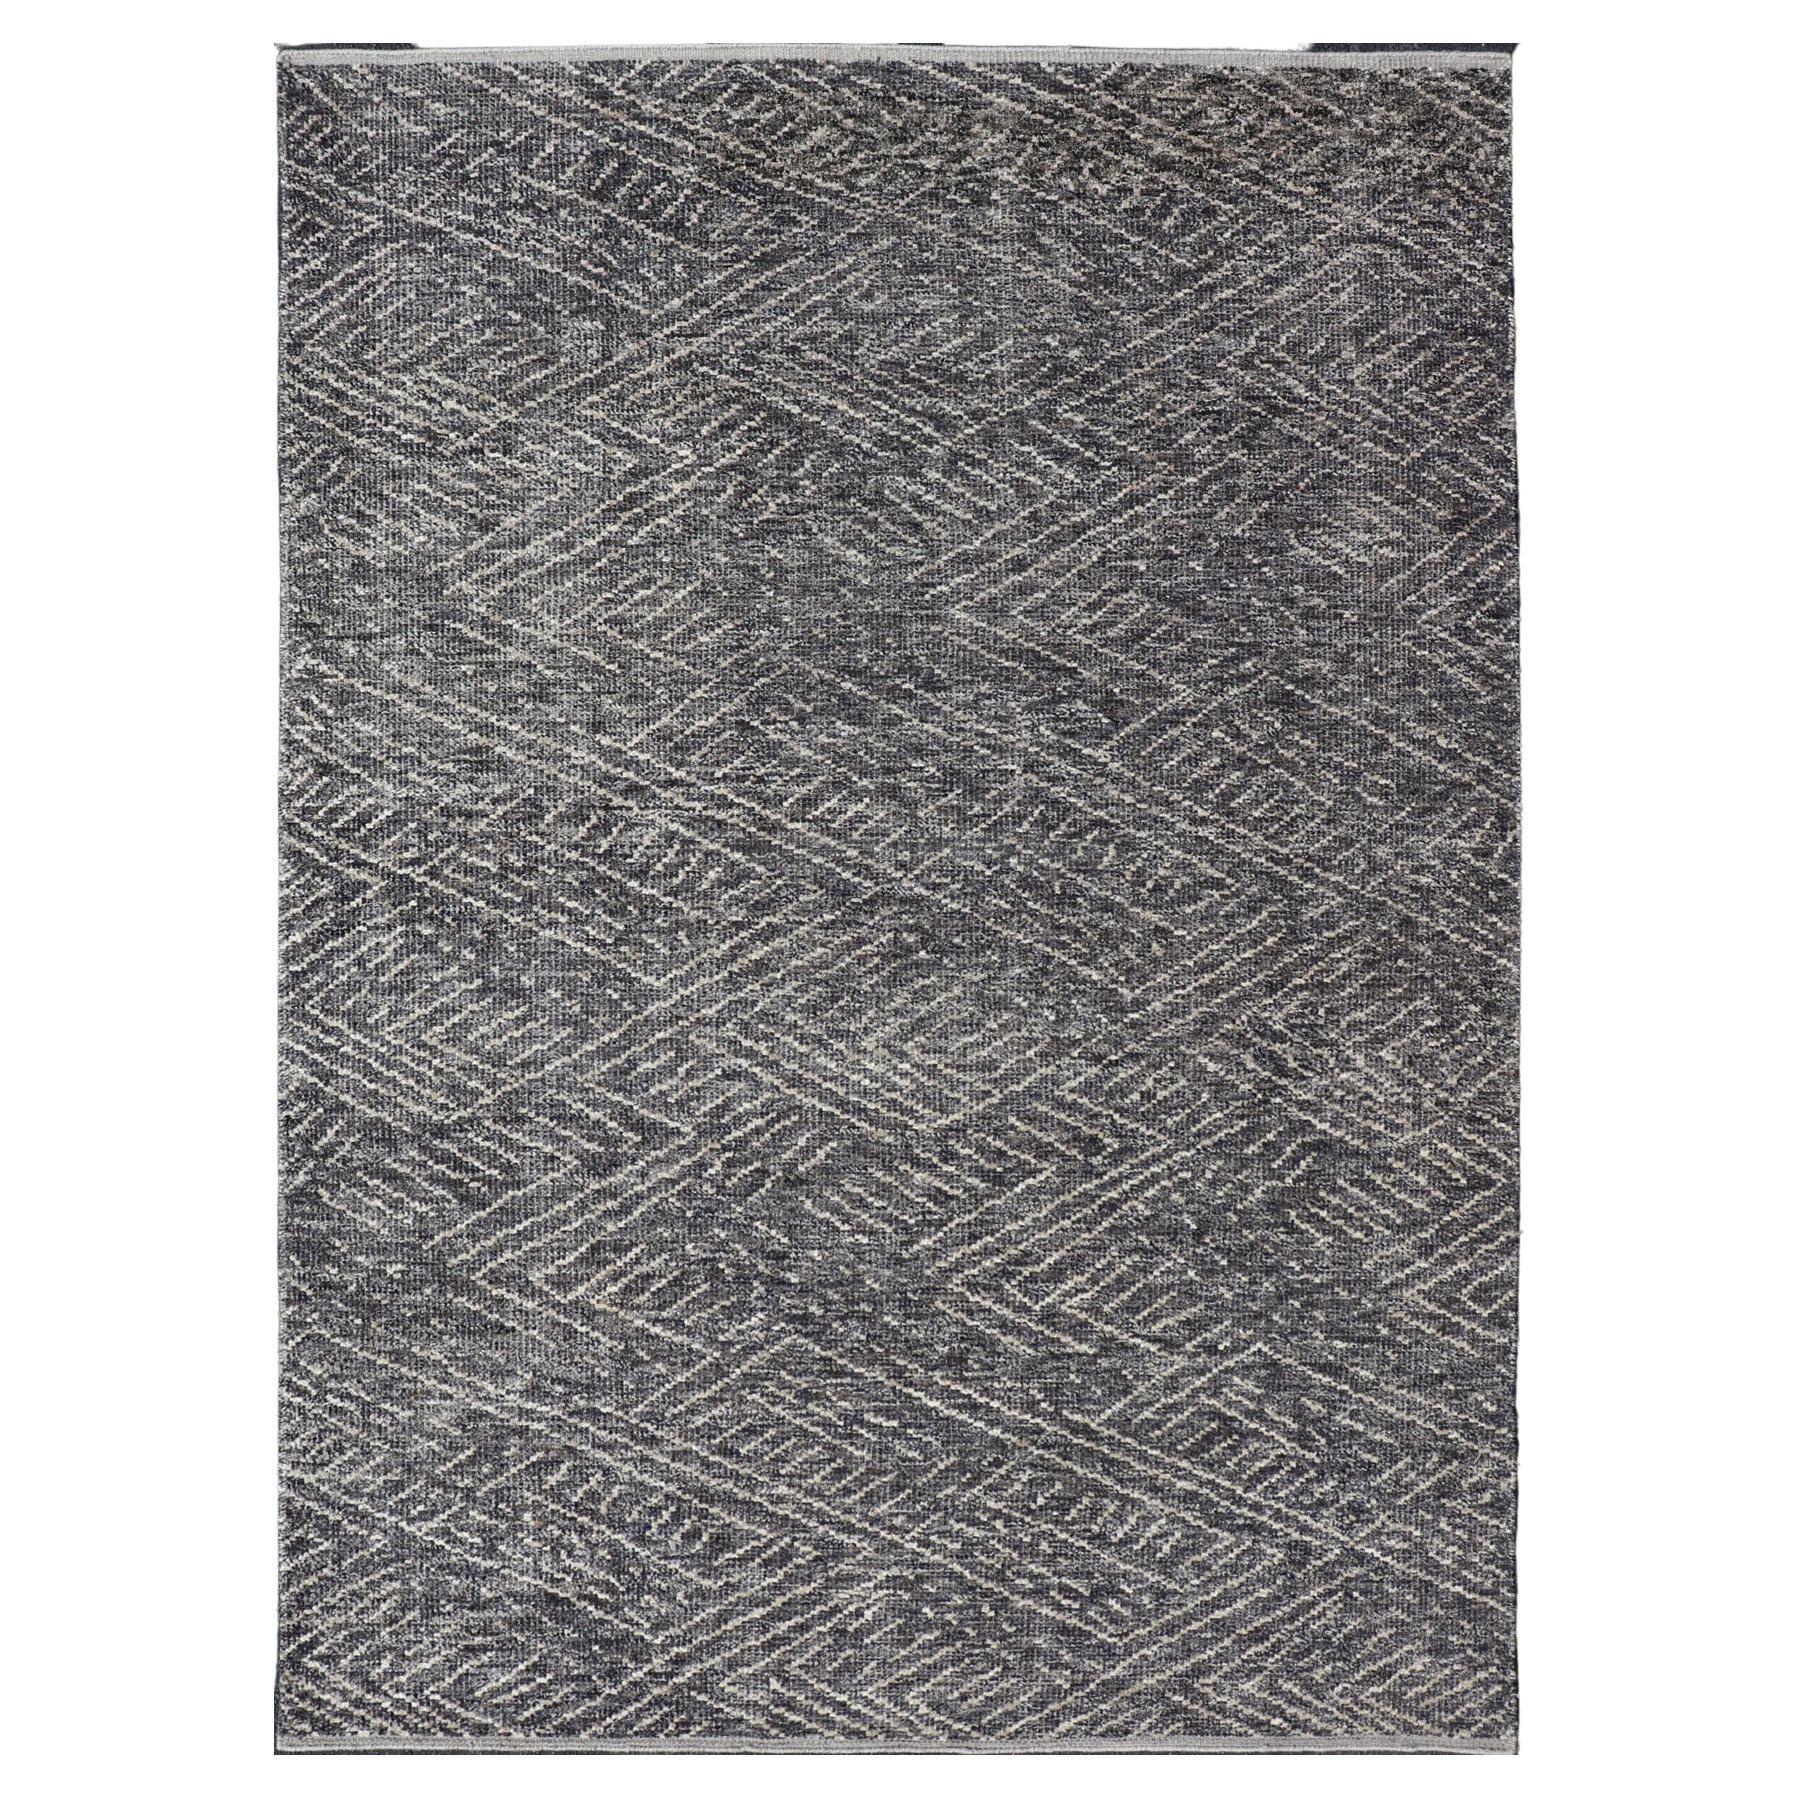 Indian Modern Casual Gray-Blue Area Rug With Minimal Crosshatch Design